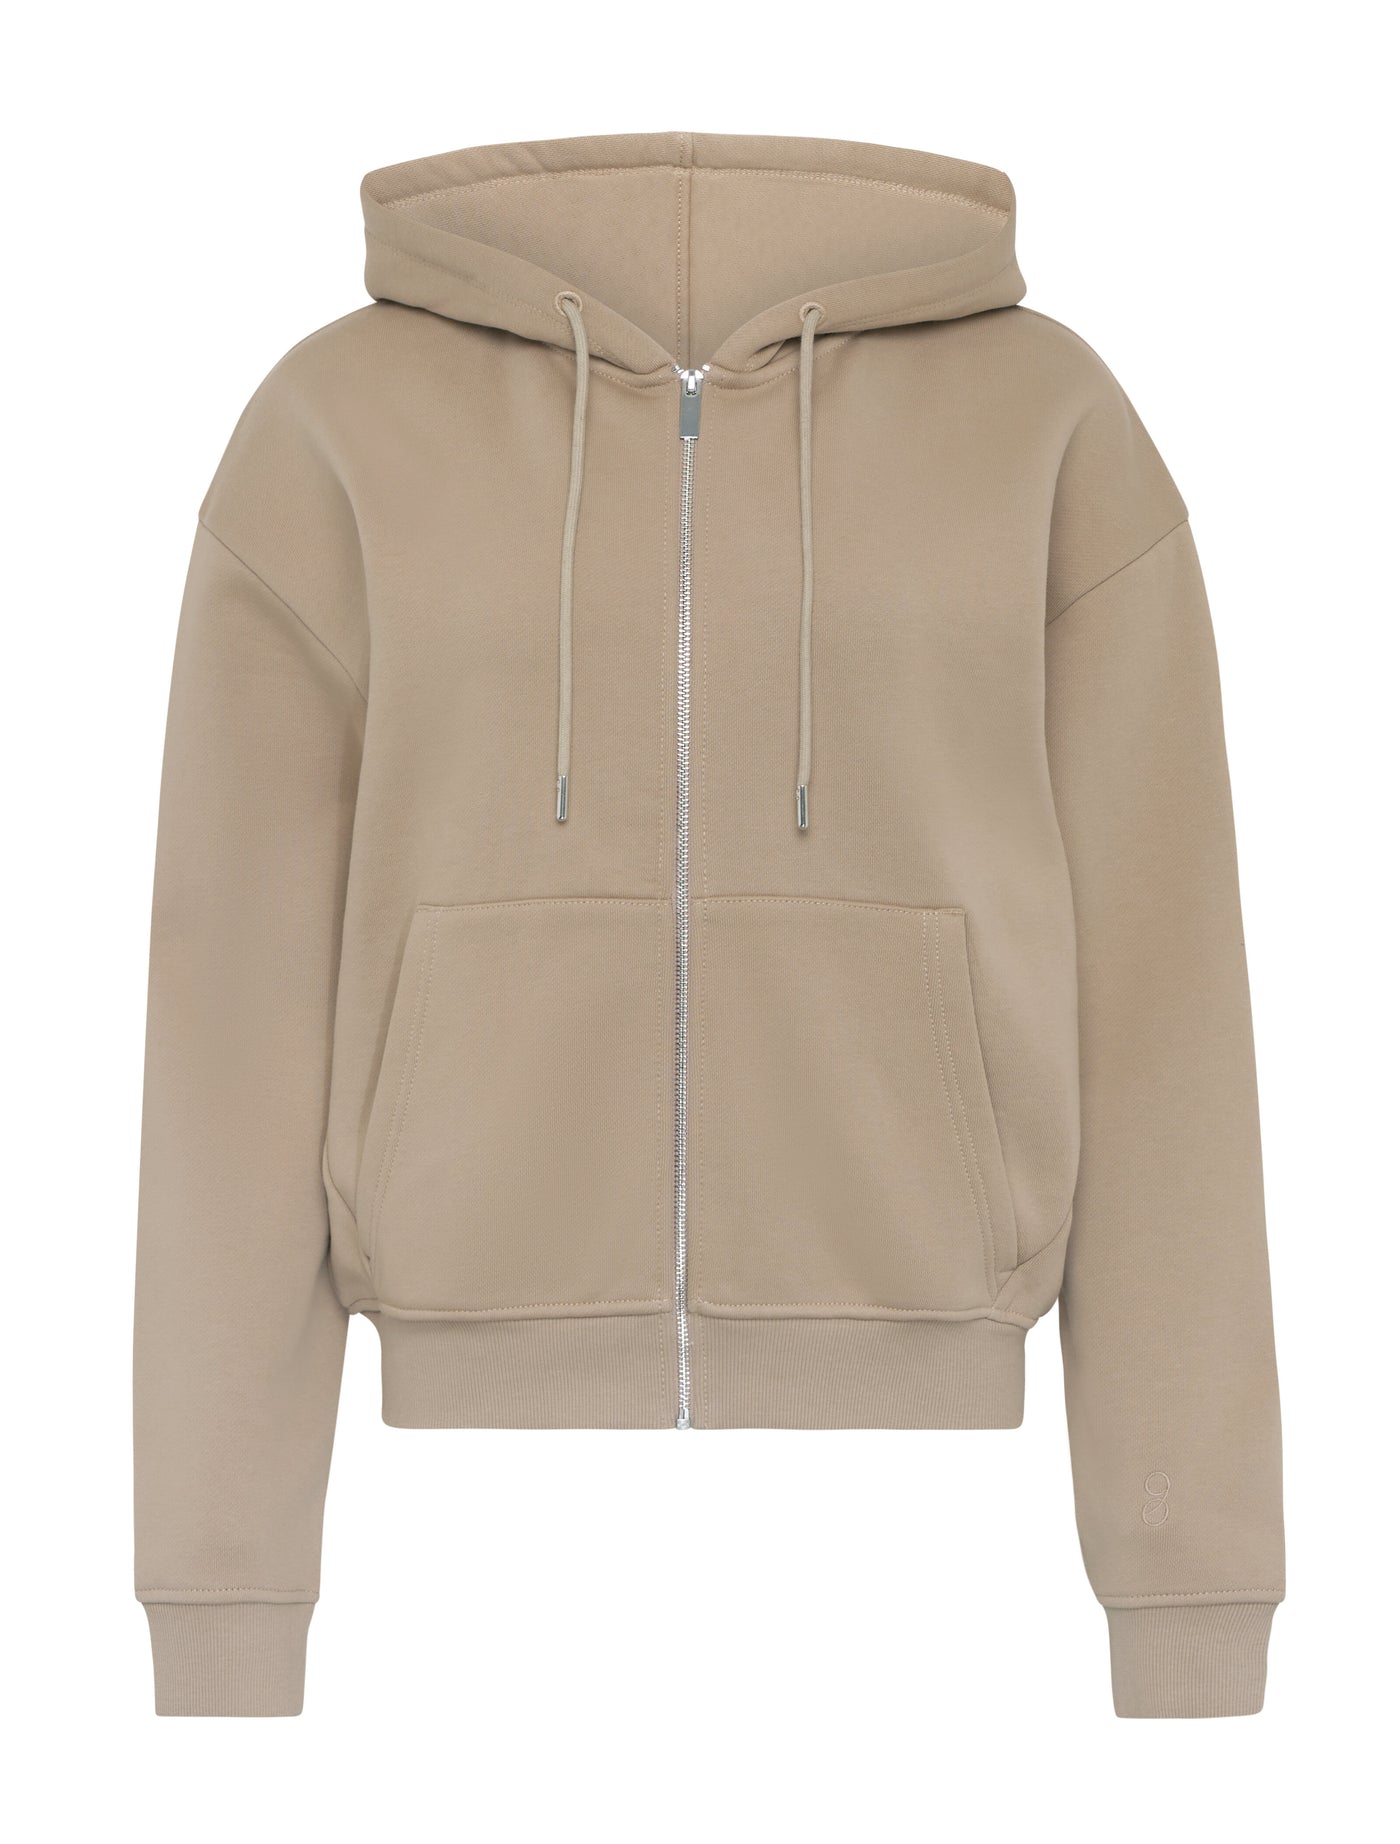 Signature Zip Up Hoodie in Taupe